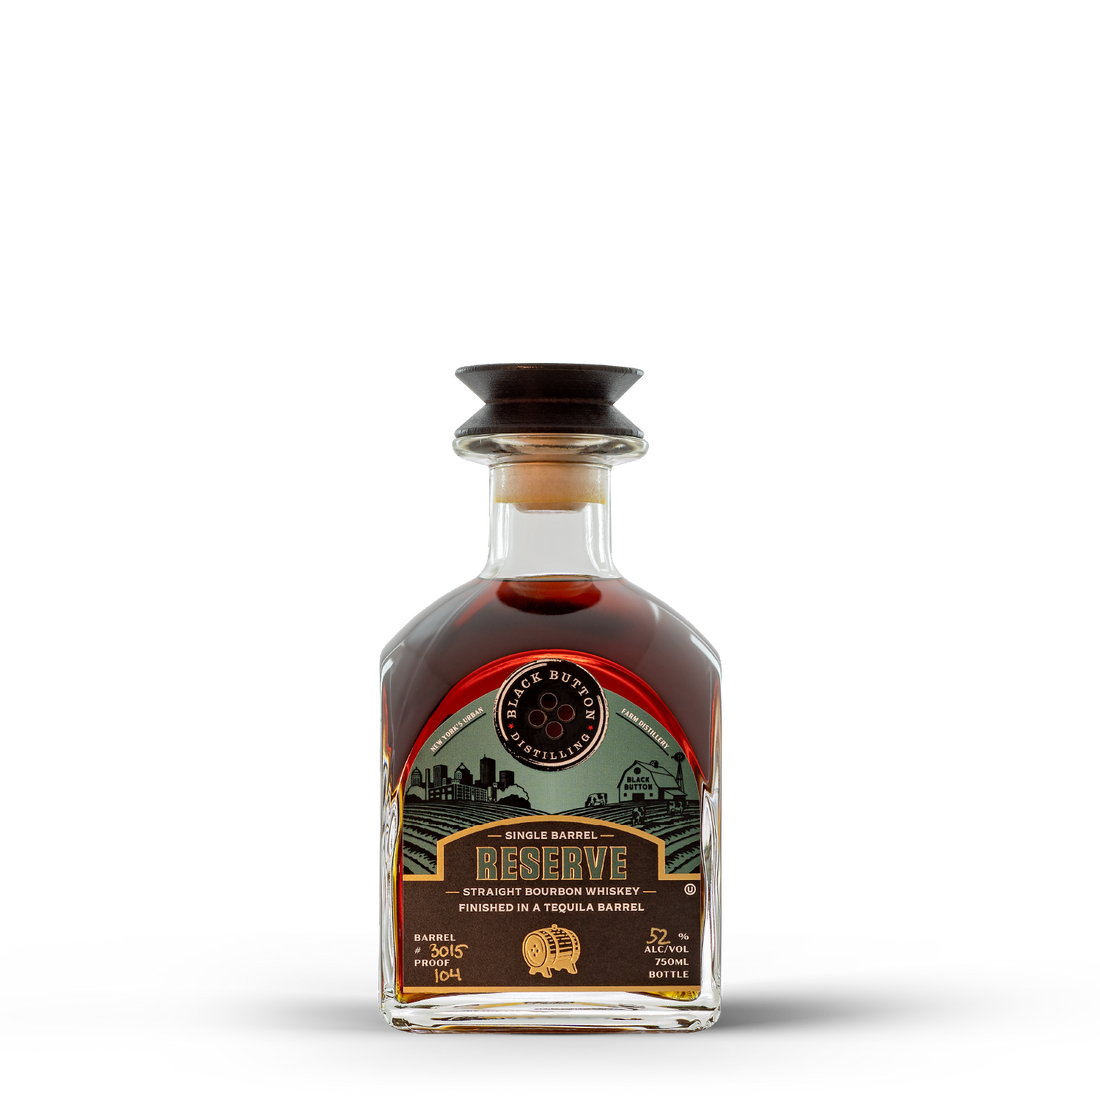 Reserve Single Barrel Bourbon Whiskey Finished in a Tequila Barrel